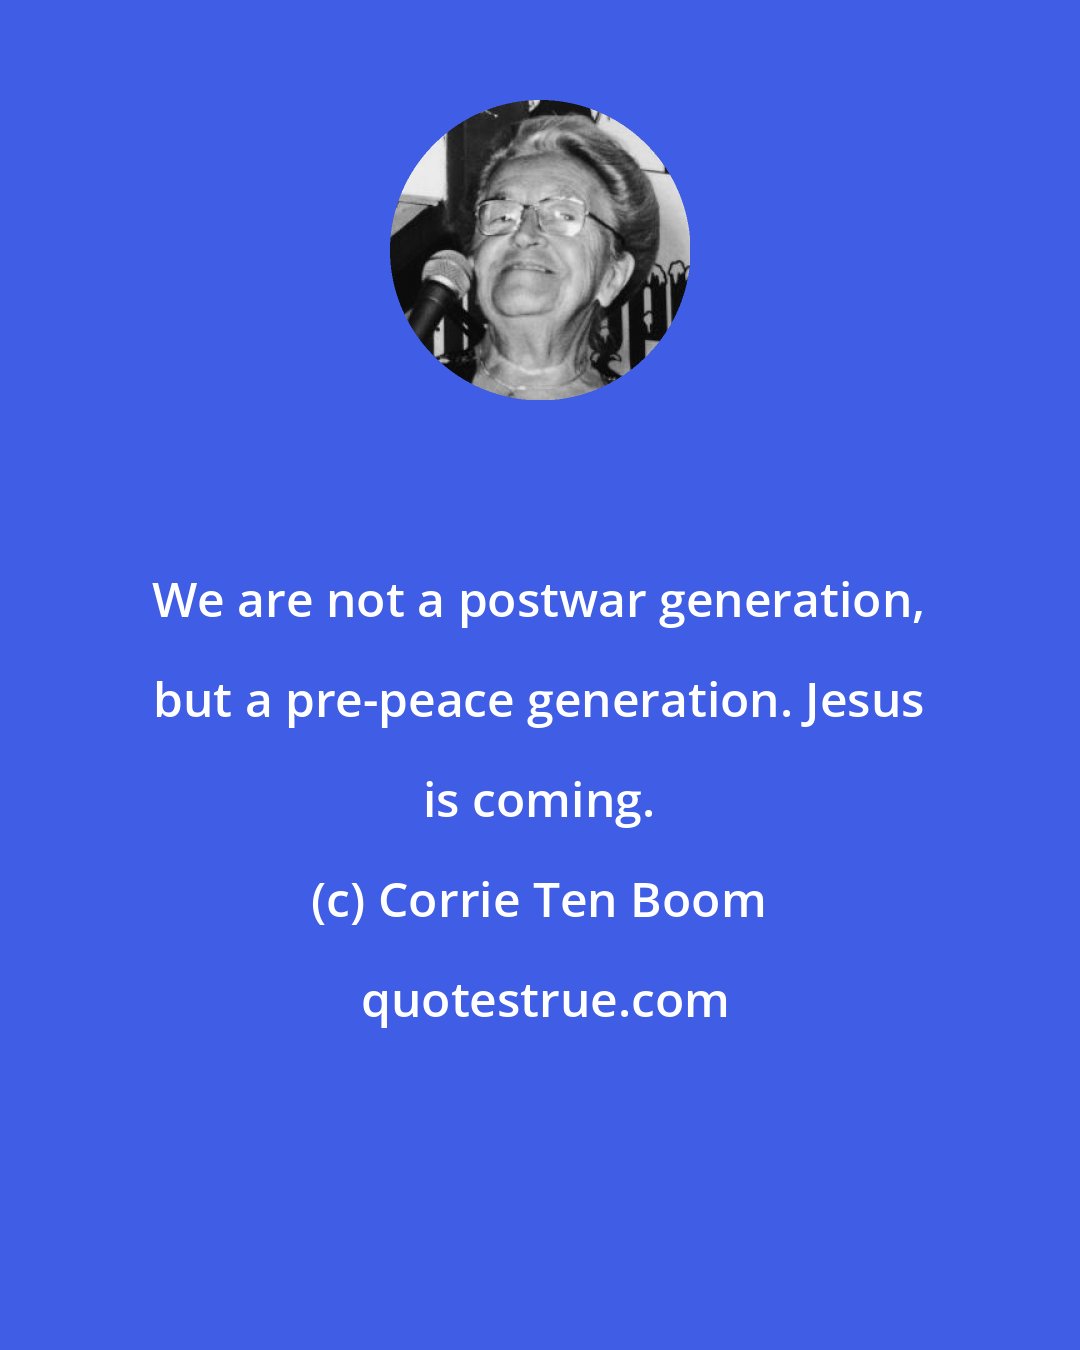 Corrie Ten Boom: We are not a postwar generation, but a pre-peace generation. Jesus is coming.